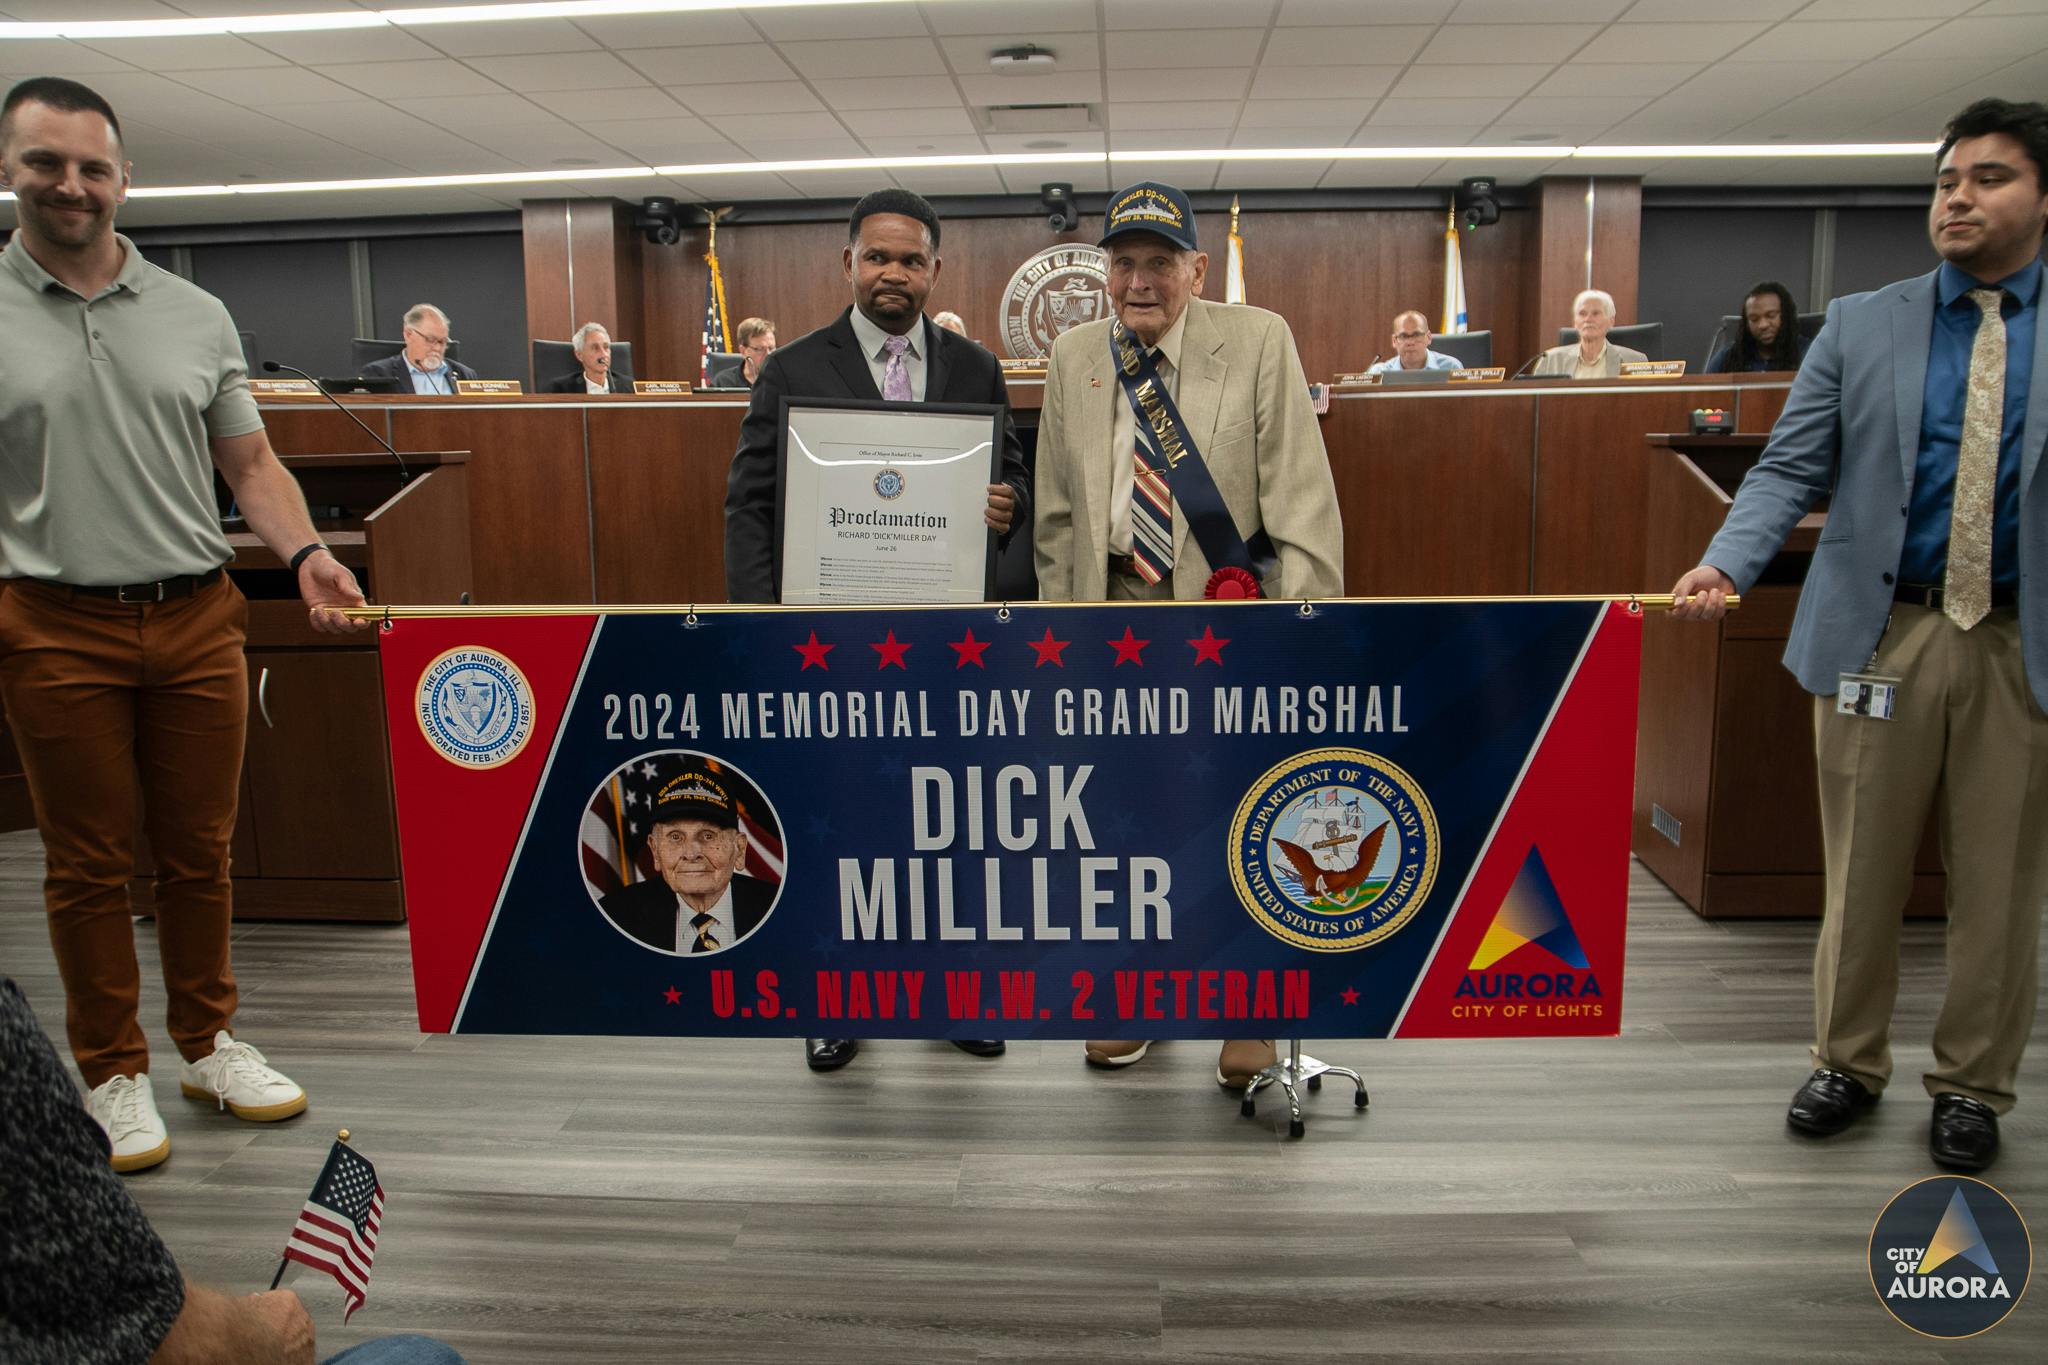 Mayor Richard C. Irvin and Dick Miller pose behind the Memorial Day Parade Grand Marshal banner.